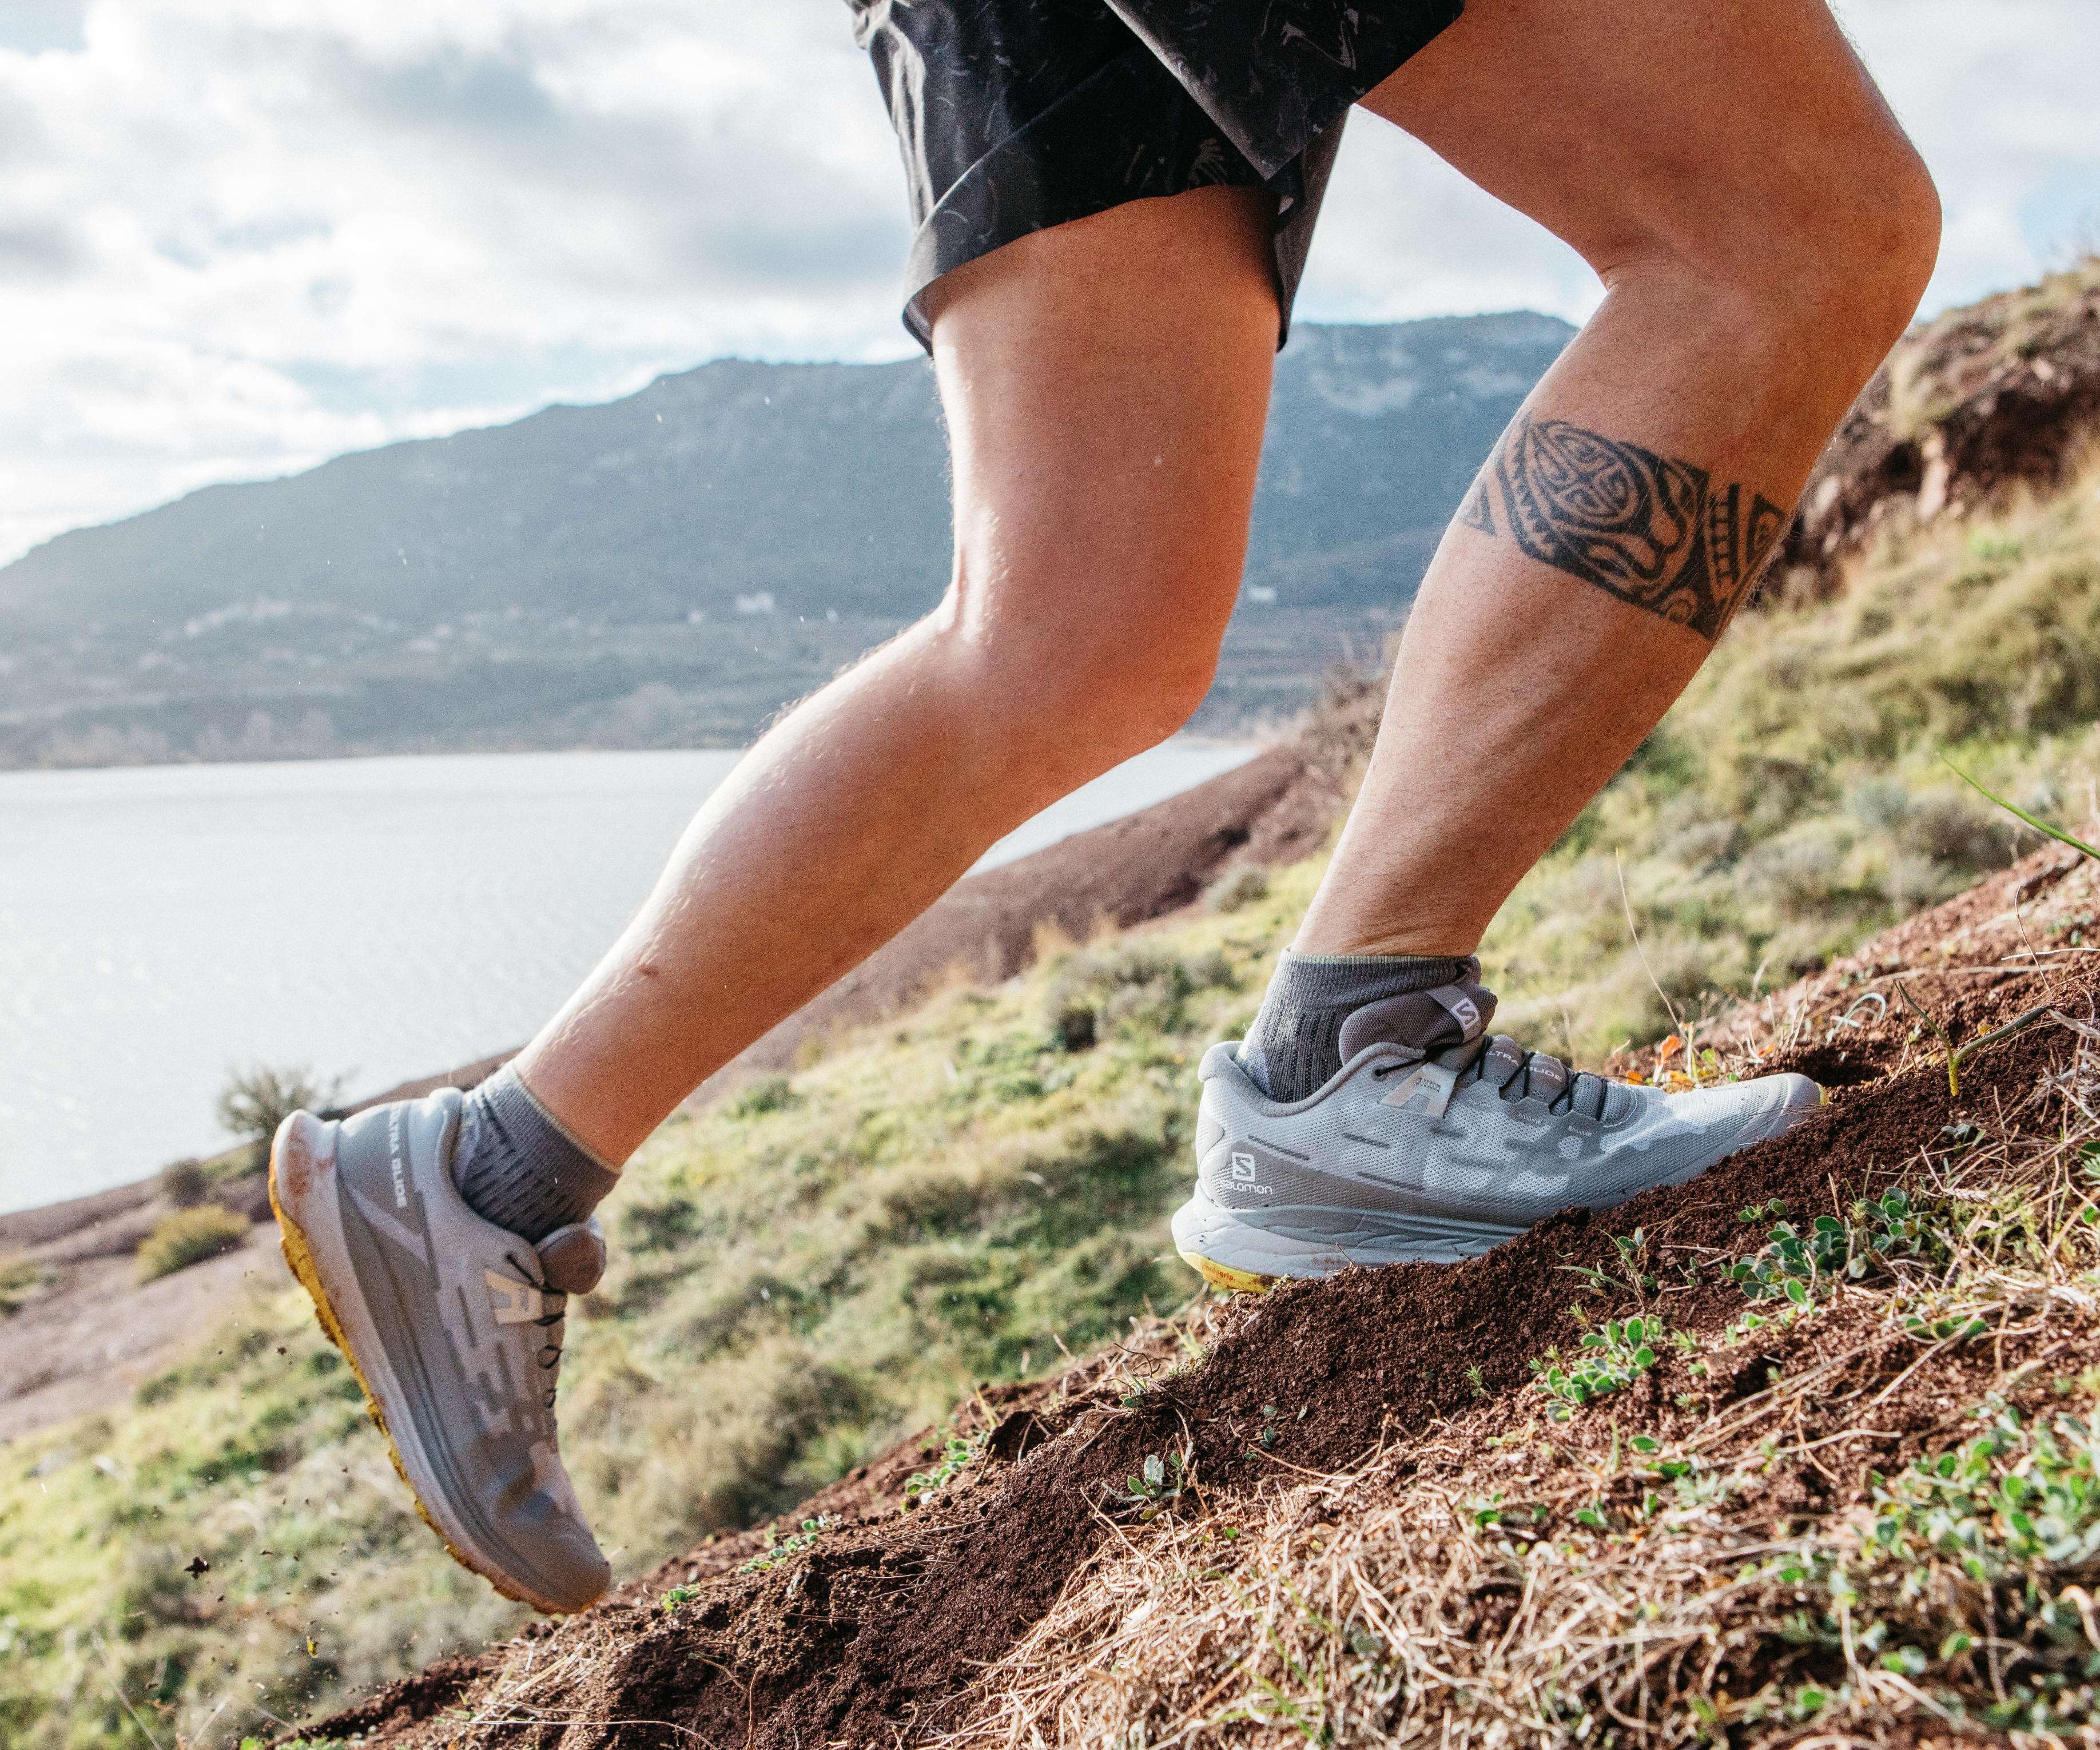 What makes a comfortable running shoe?